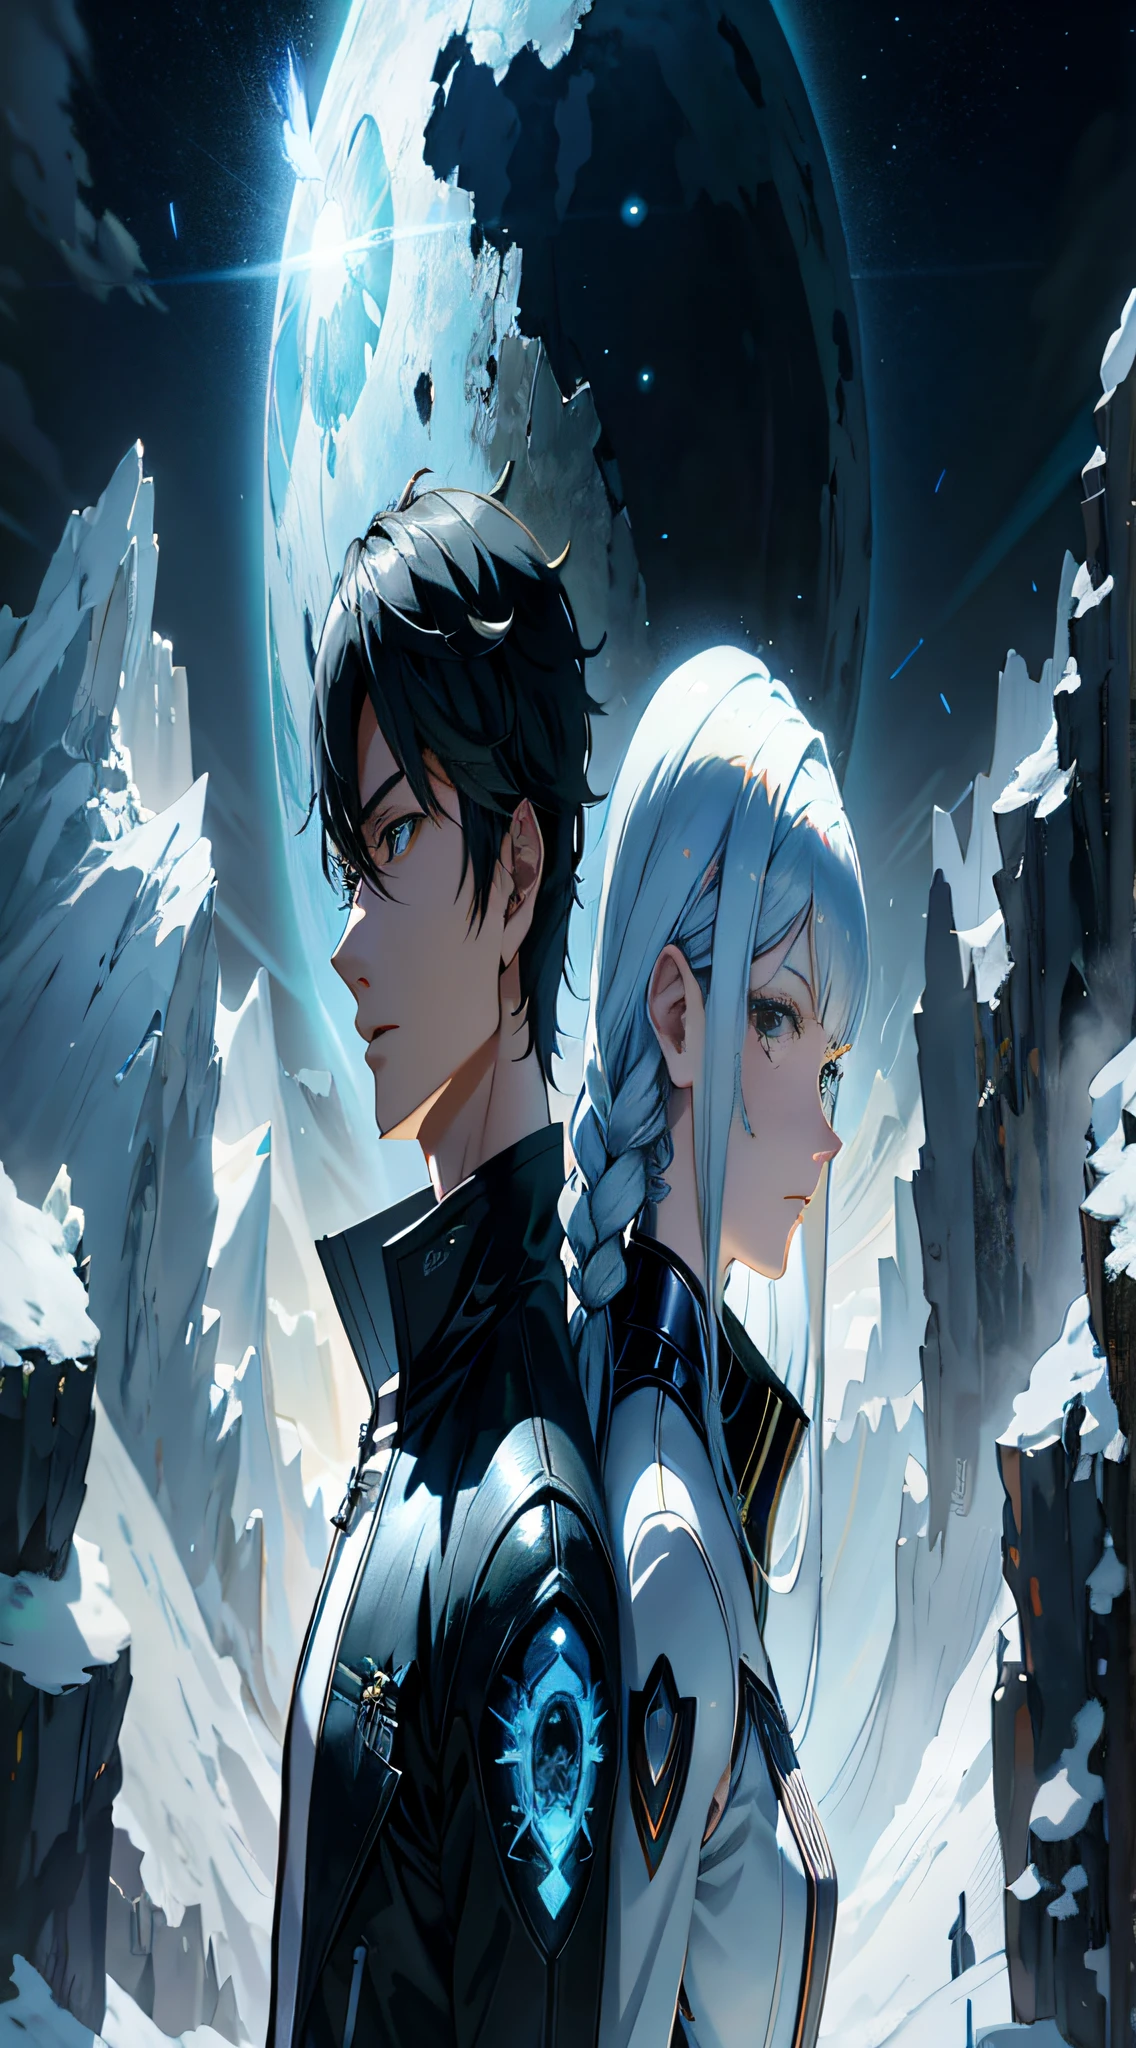 Anime couple standing in front of Full Moon Mountain, ross tran and bayard wu, focus on two androids, akehiko inoue and ross tran, modern sci-fi anime, edgar maxence and ross tran, krenz cushart and wenjun lin, sci fi anime, sci fi anime, key art, Digital cyberpunk anime art